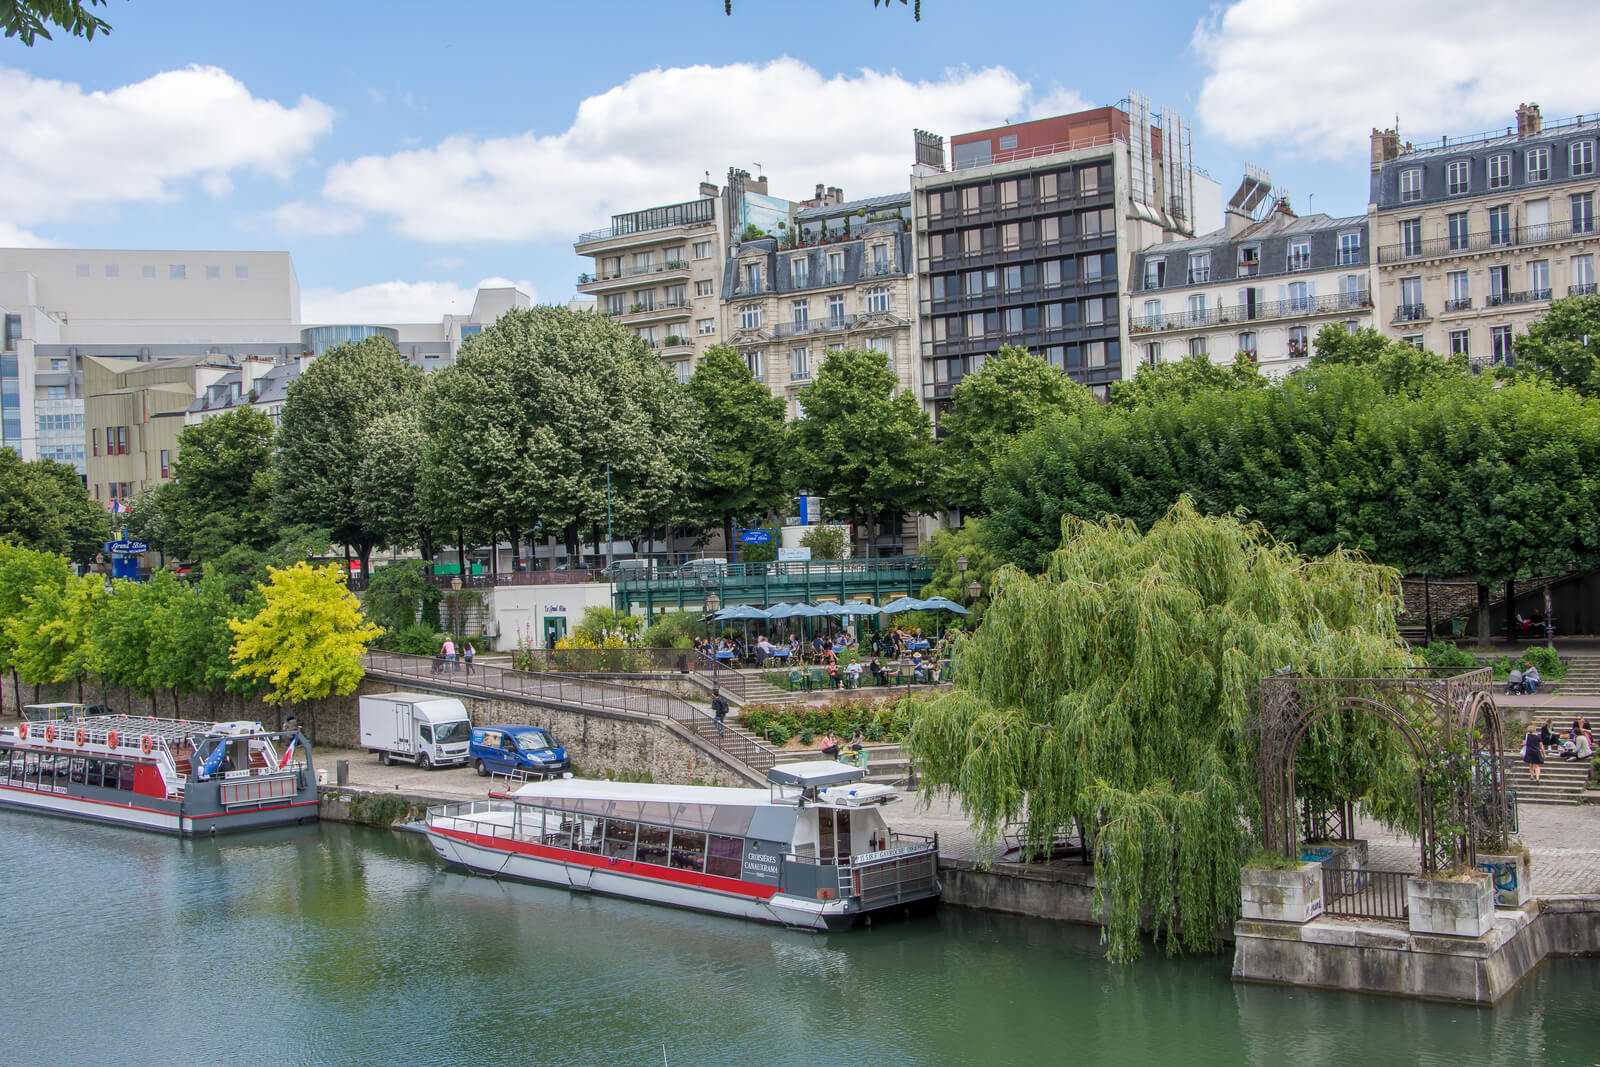 How long is the Seine River dinner cruise